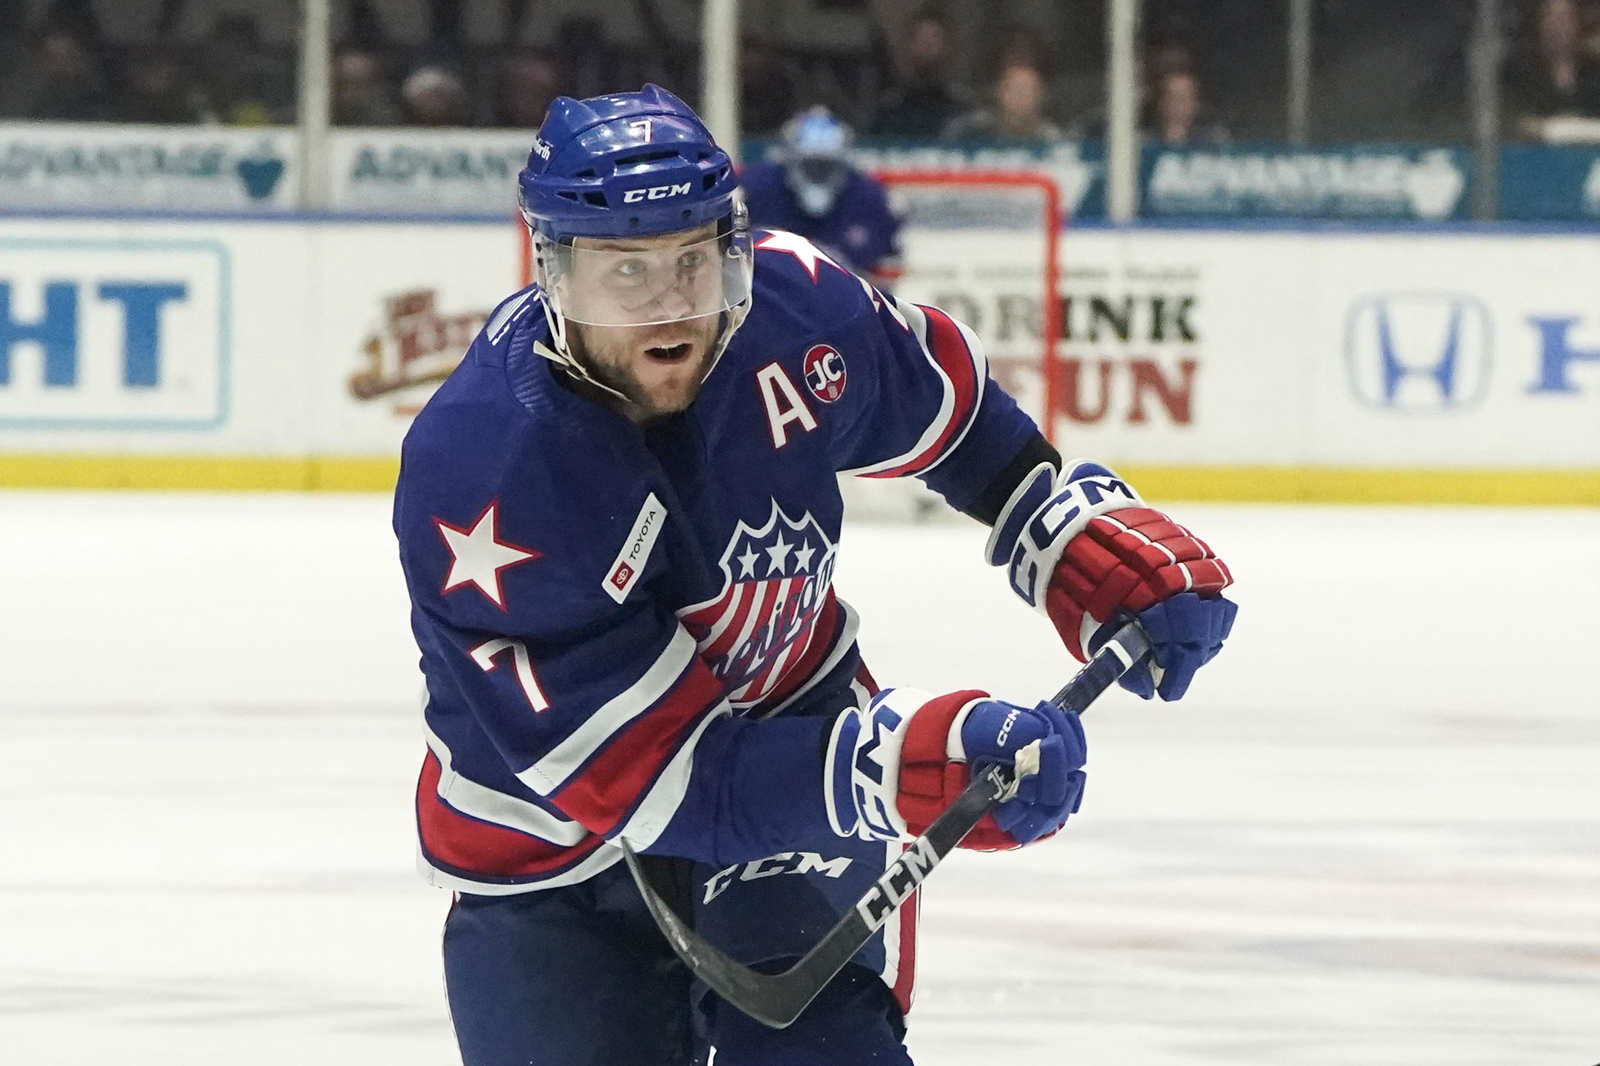 Rochester Amerks playoff run ends in conference final